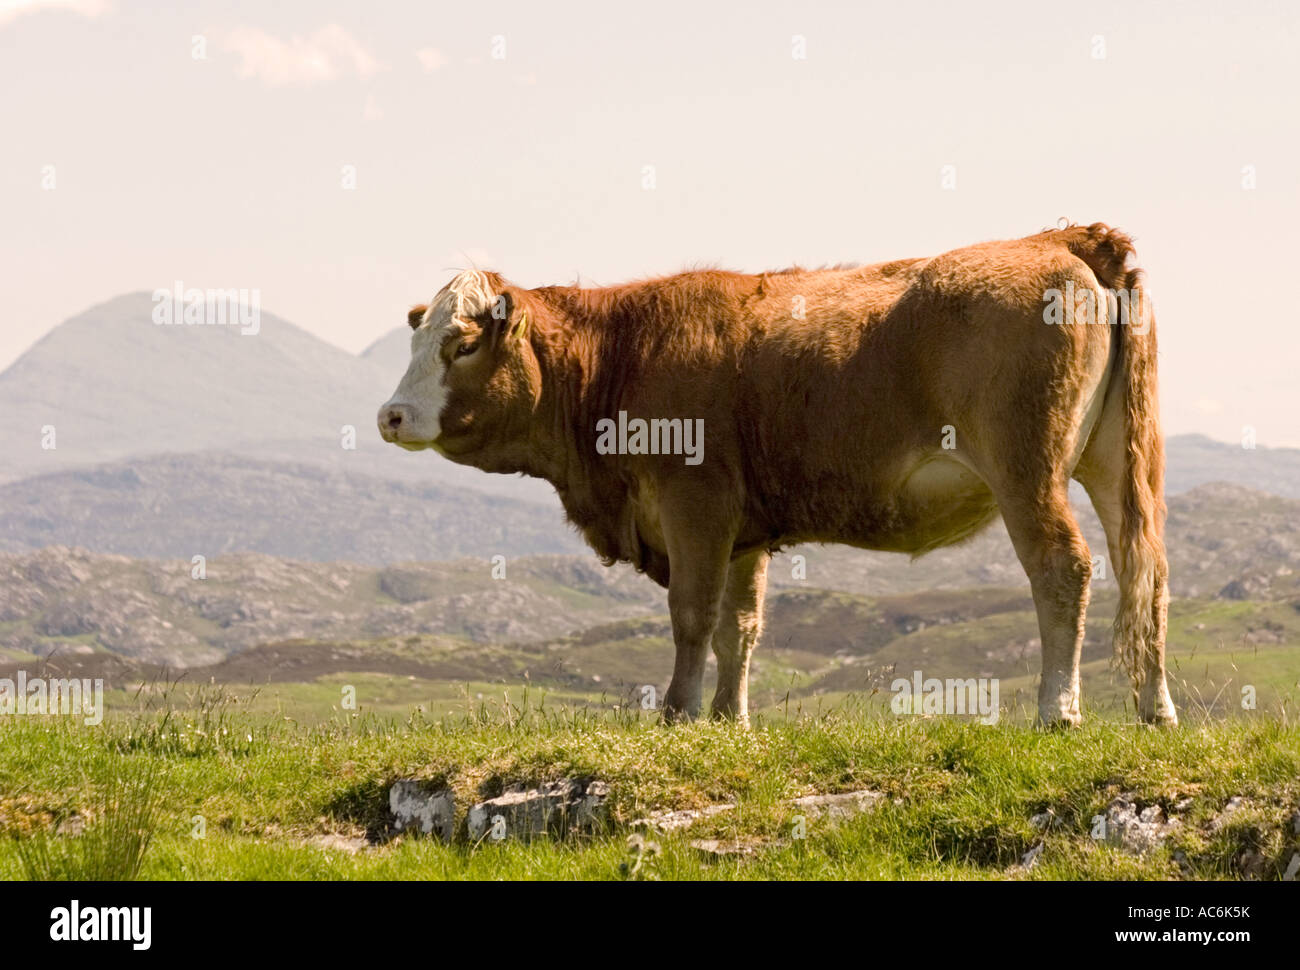 Brown heifer cow standing on grass in Scotland,UK Stock Photo